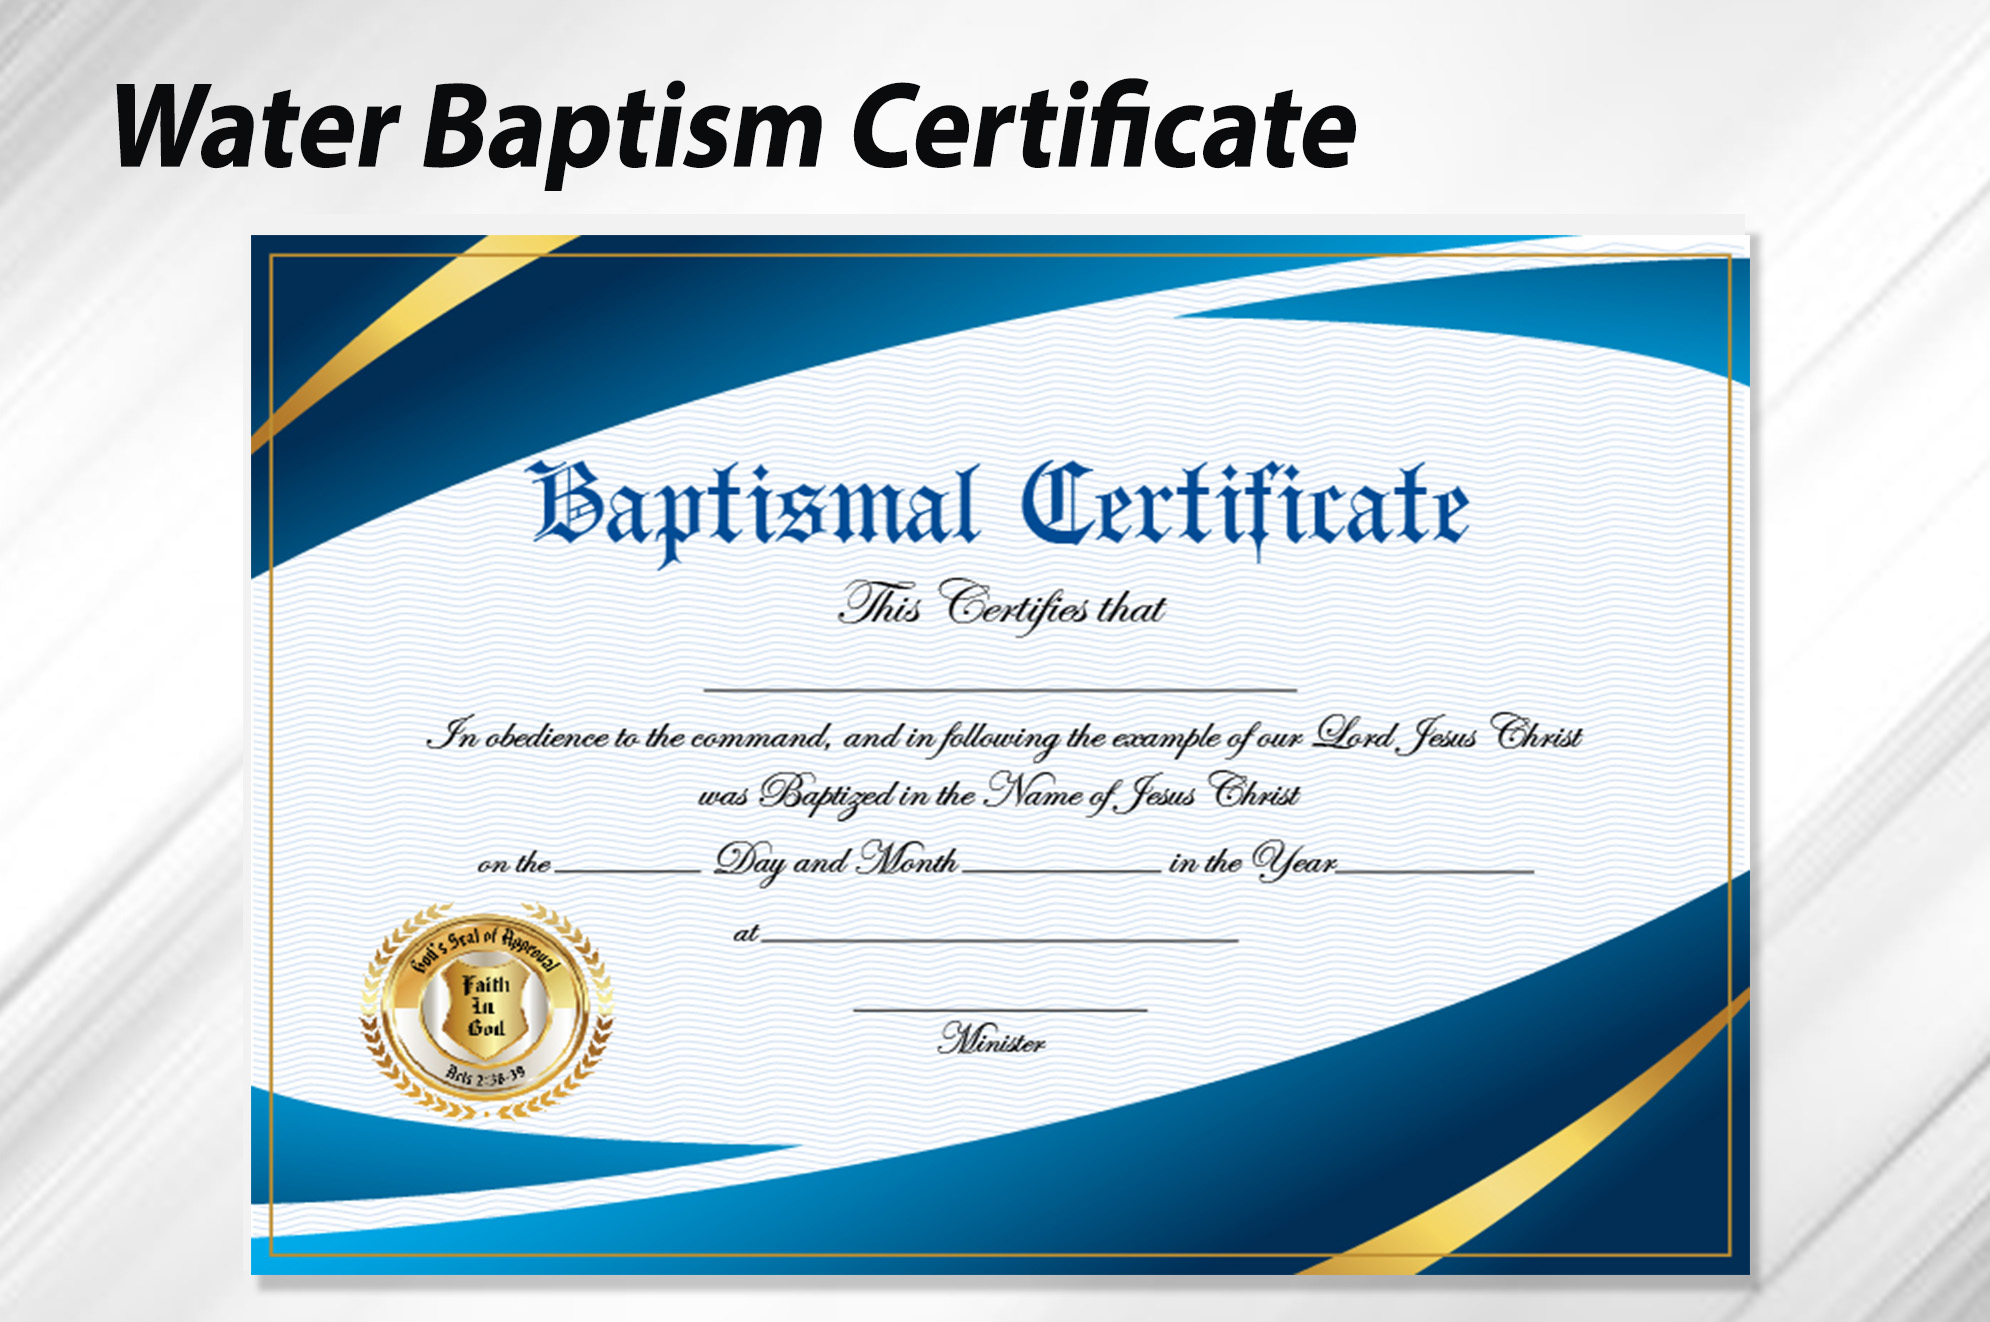 water-baptism-certificate-4572-apostolic-new-life-publications